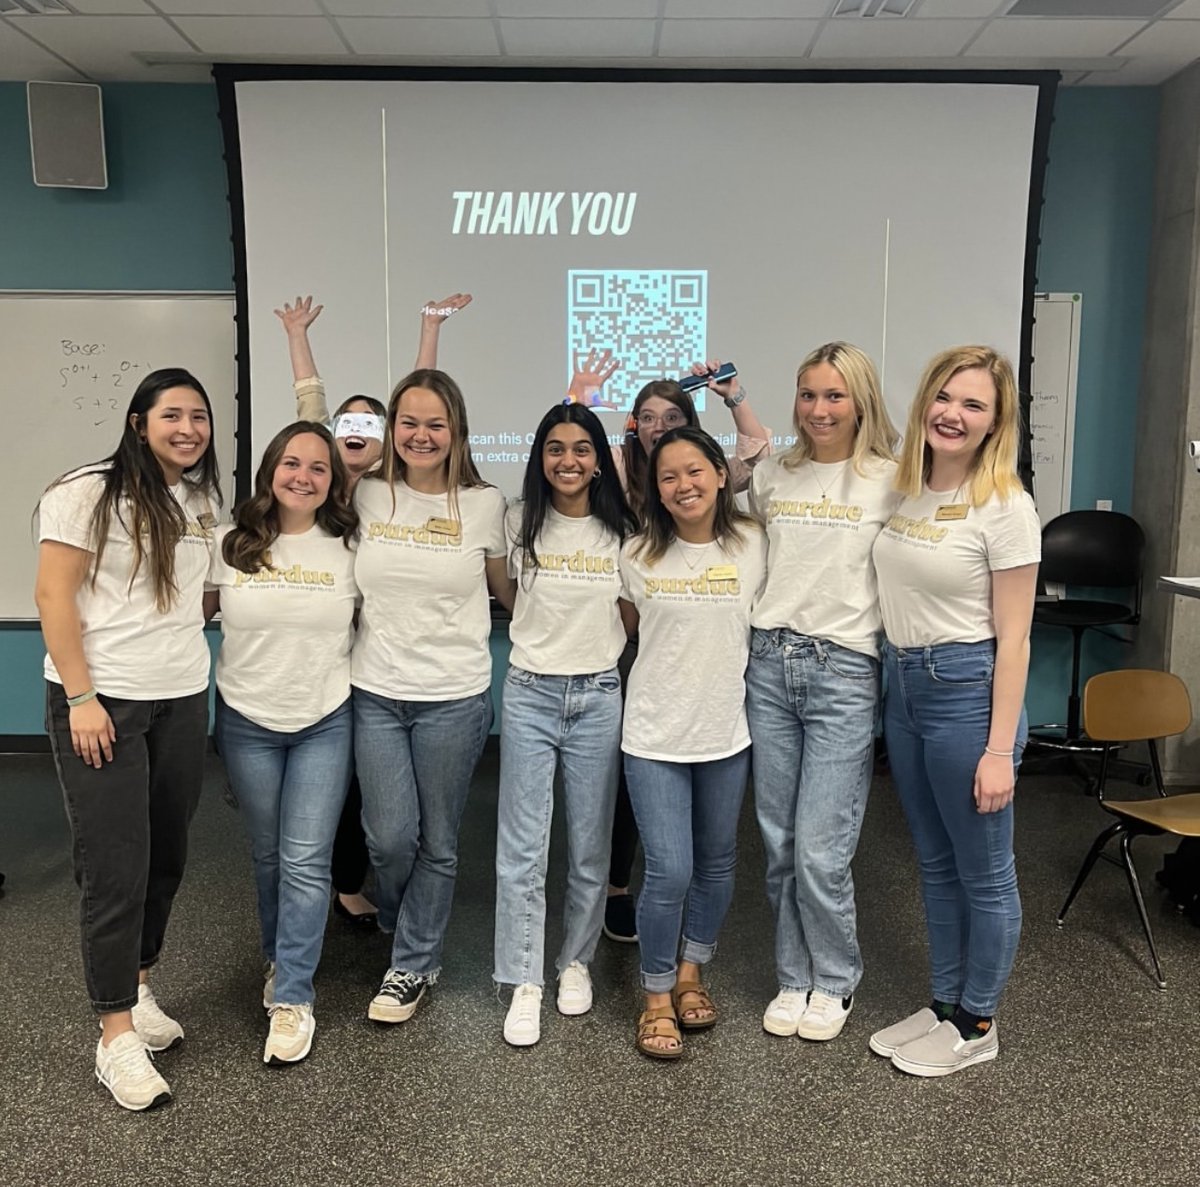 Happy #PurdueDayofGiving Boilermakers! Our incredible Women in Business Ambassadors are what make this community so empowering and positive, so please consider selecting BWC for donations this Day of Giving!

@PurdueBusiness #BWC #BrockWilsonCenter #PurdueUniversity